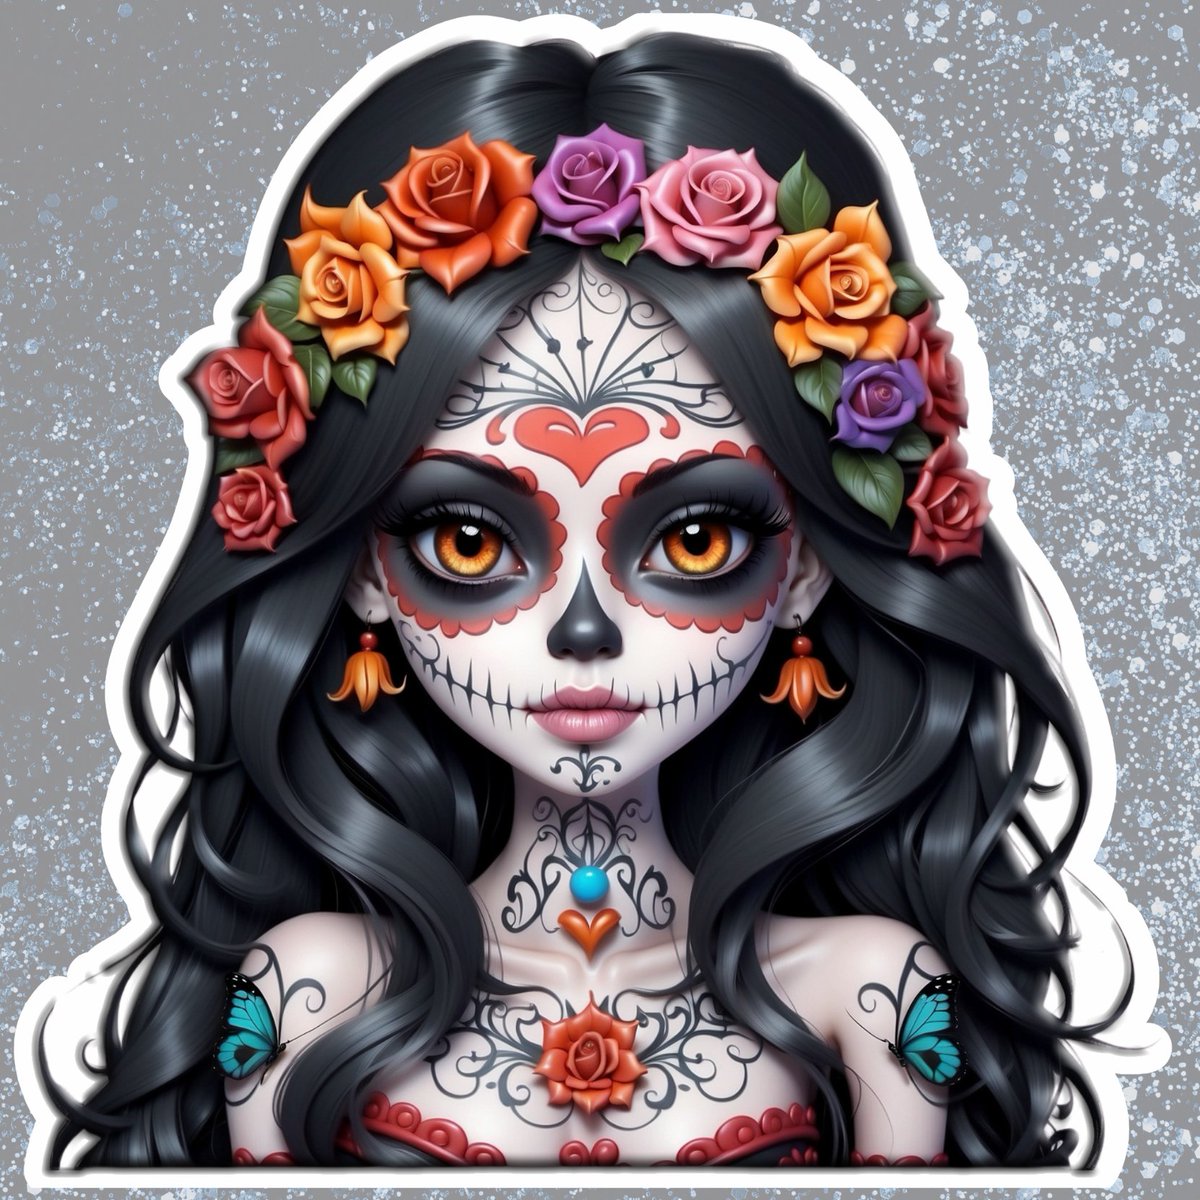 Sugar Skull Girl Sticker! 🌸 Perfect for laptops and beyond. Follow for more vibrant and unique art. 🚀 Link in bio. #SugarSkullGirl #StickerMagic #FollowForCuteness #DayoftheDead #Calavera 
#DiadelosMuertos #gothic #LatinaArt #LaptopDecal #CollectibleSticker